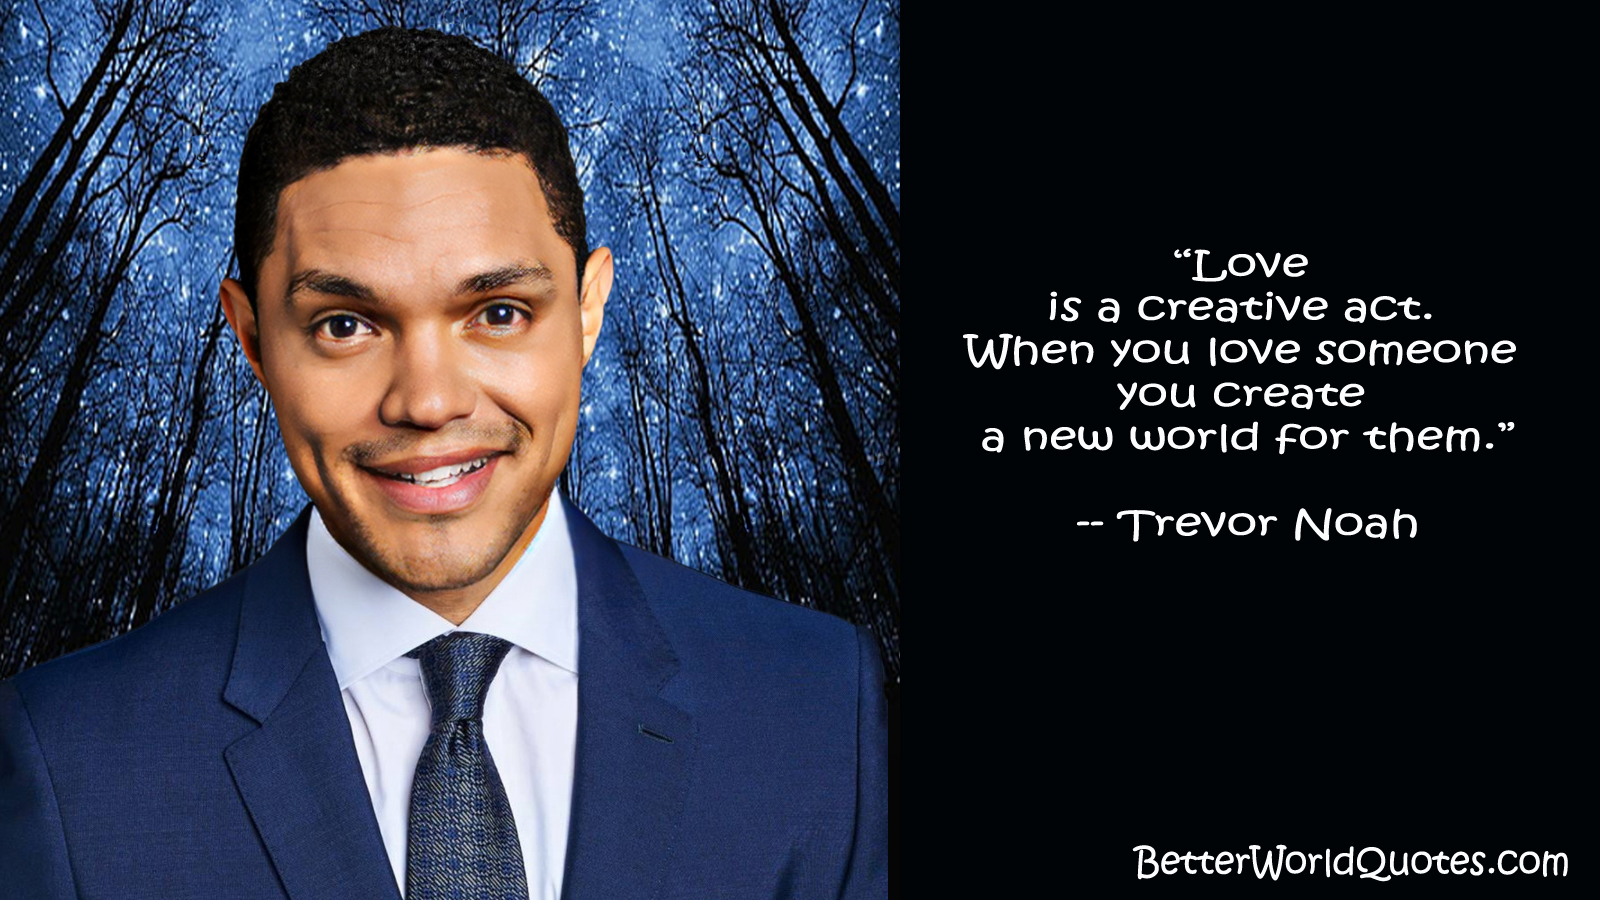 Trevor Noah: Love is a creative act. When you love someone you create a new world for them. 